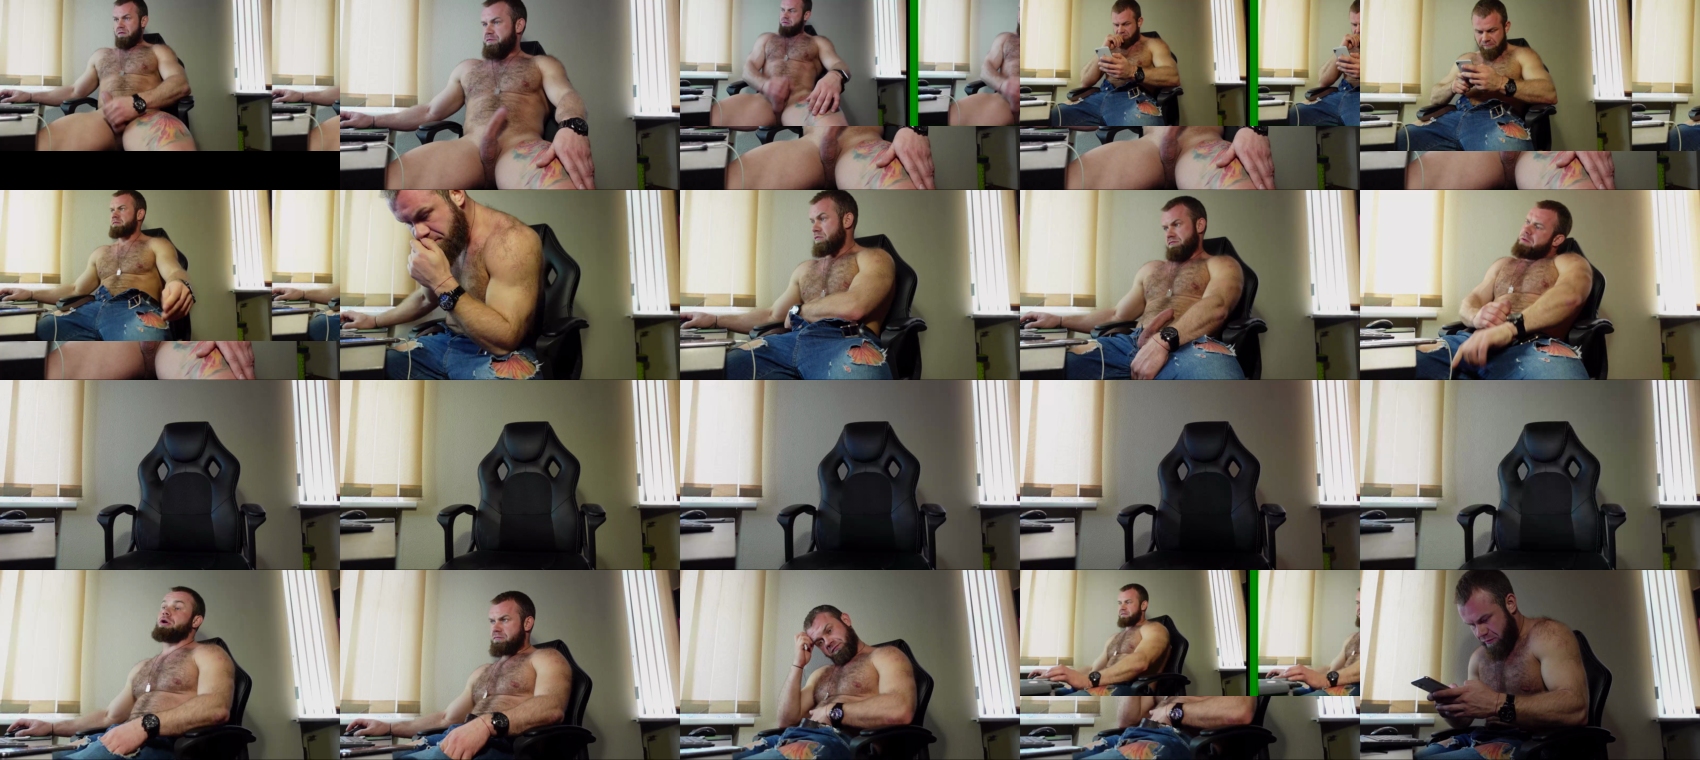 Tommy_Burnzz  27-05-2022 Recorded Video bigcock